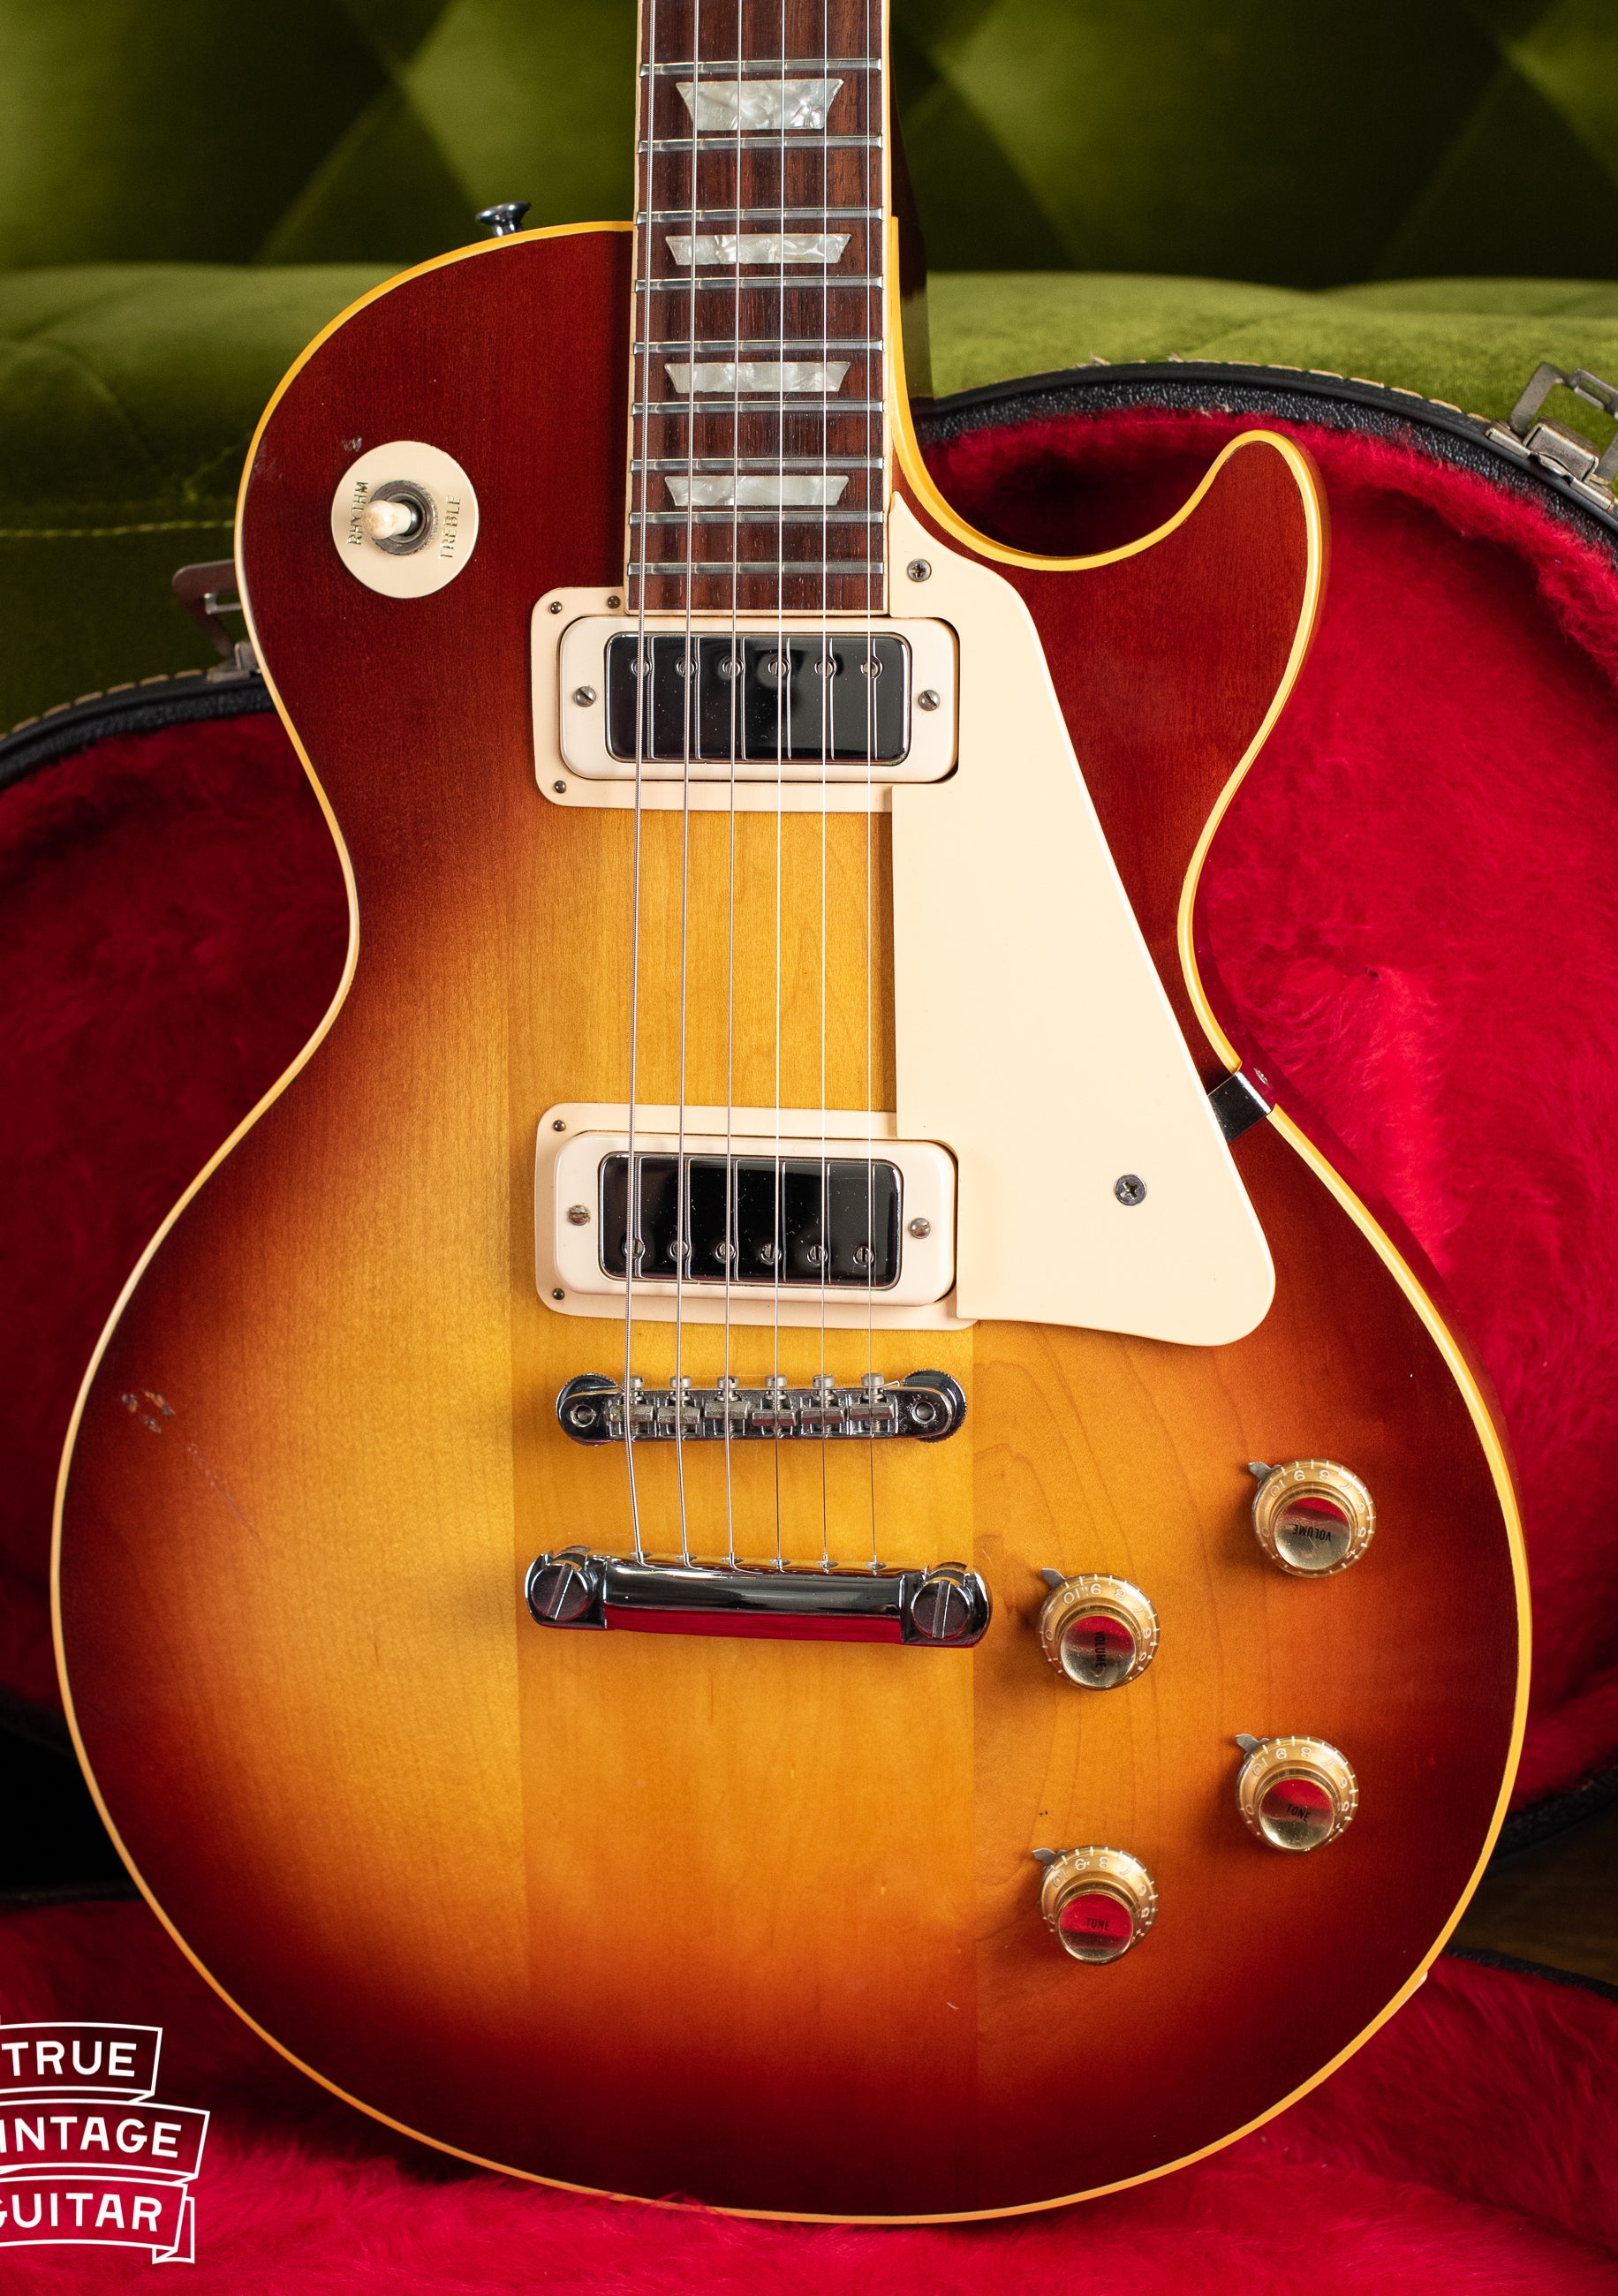 Vintage 1972 Gibson Les Paul Deluxe electric guitar